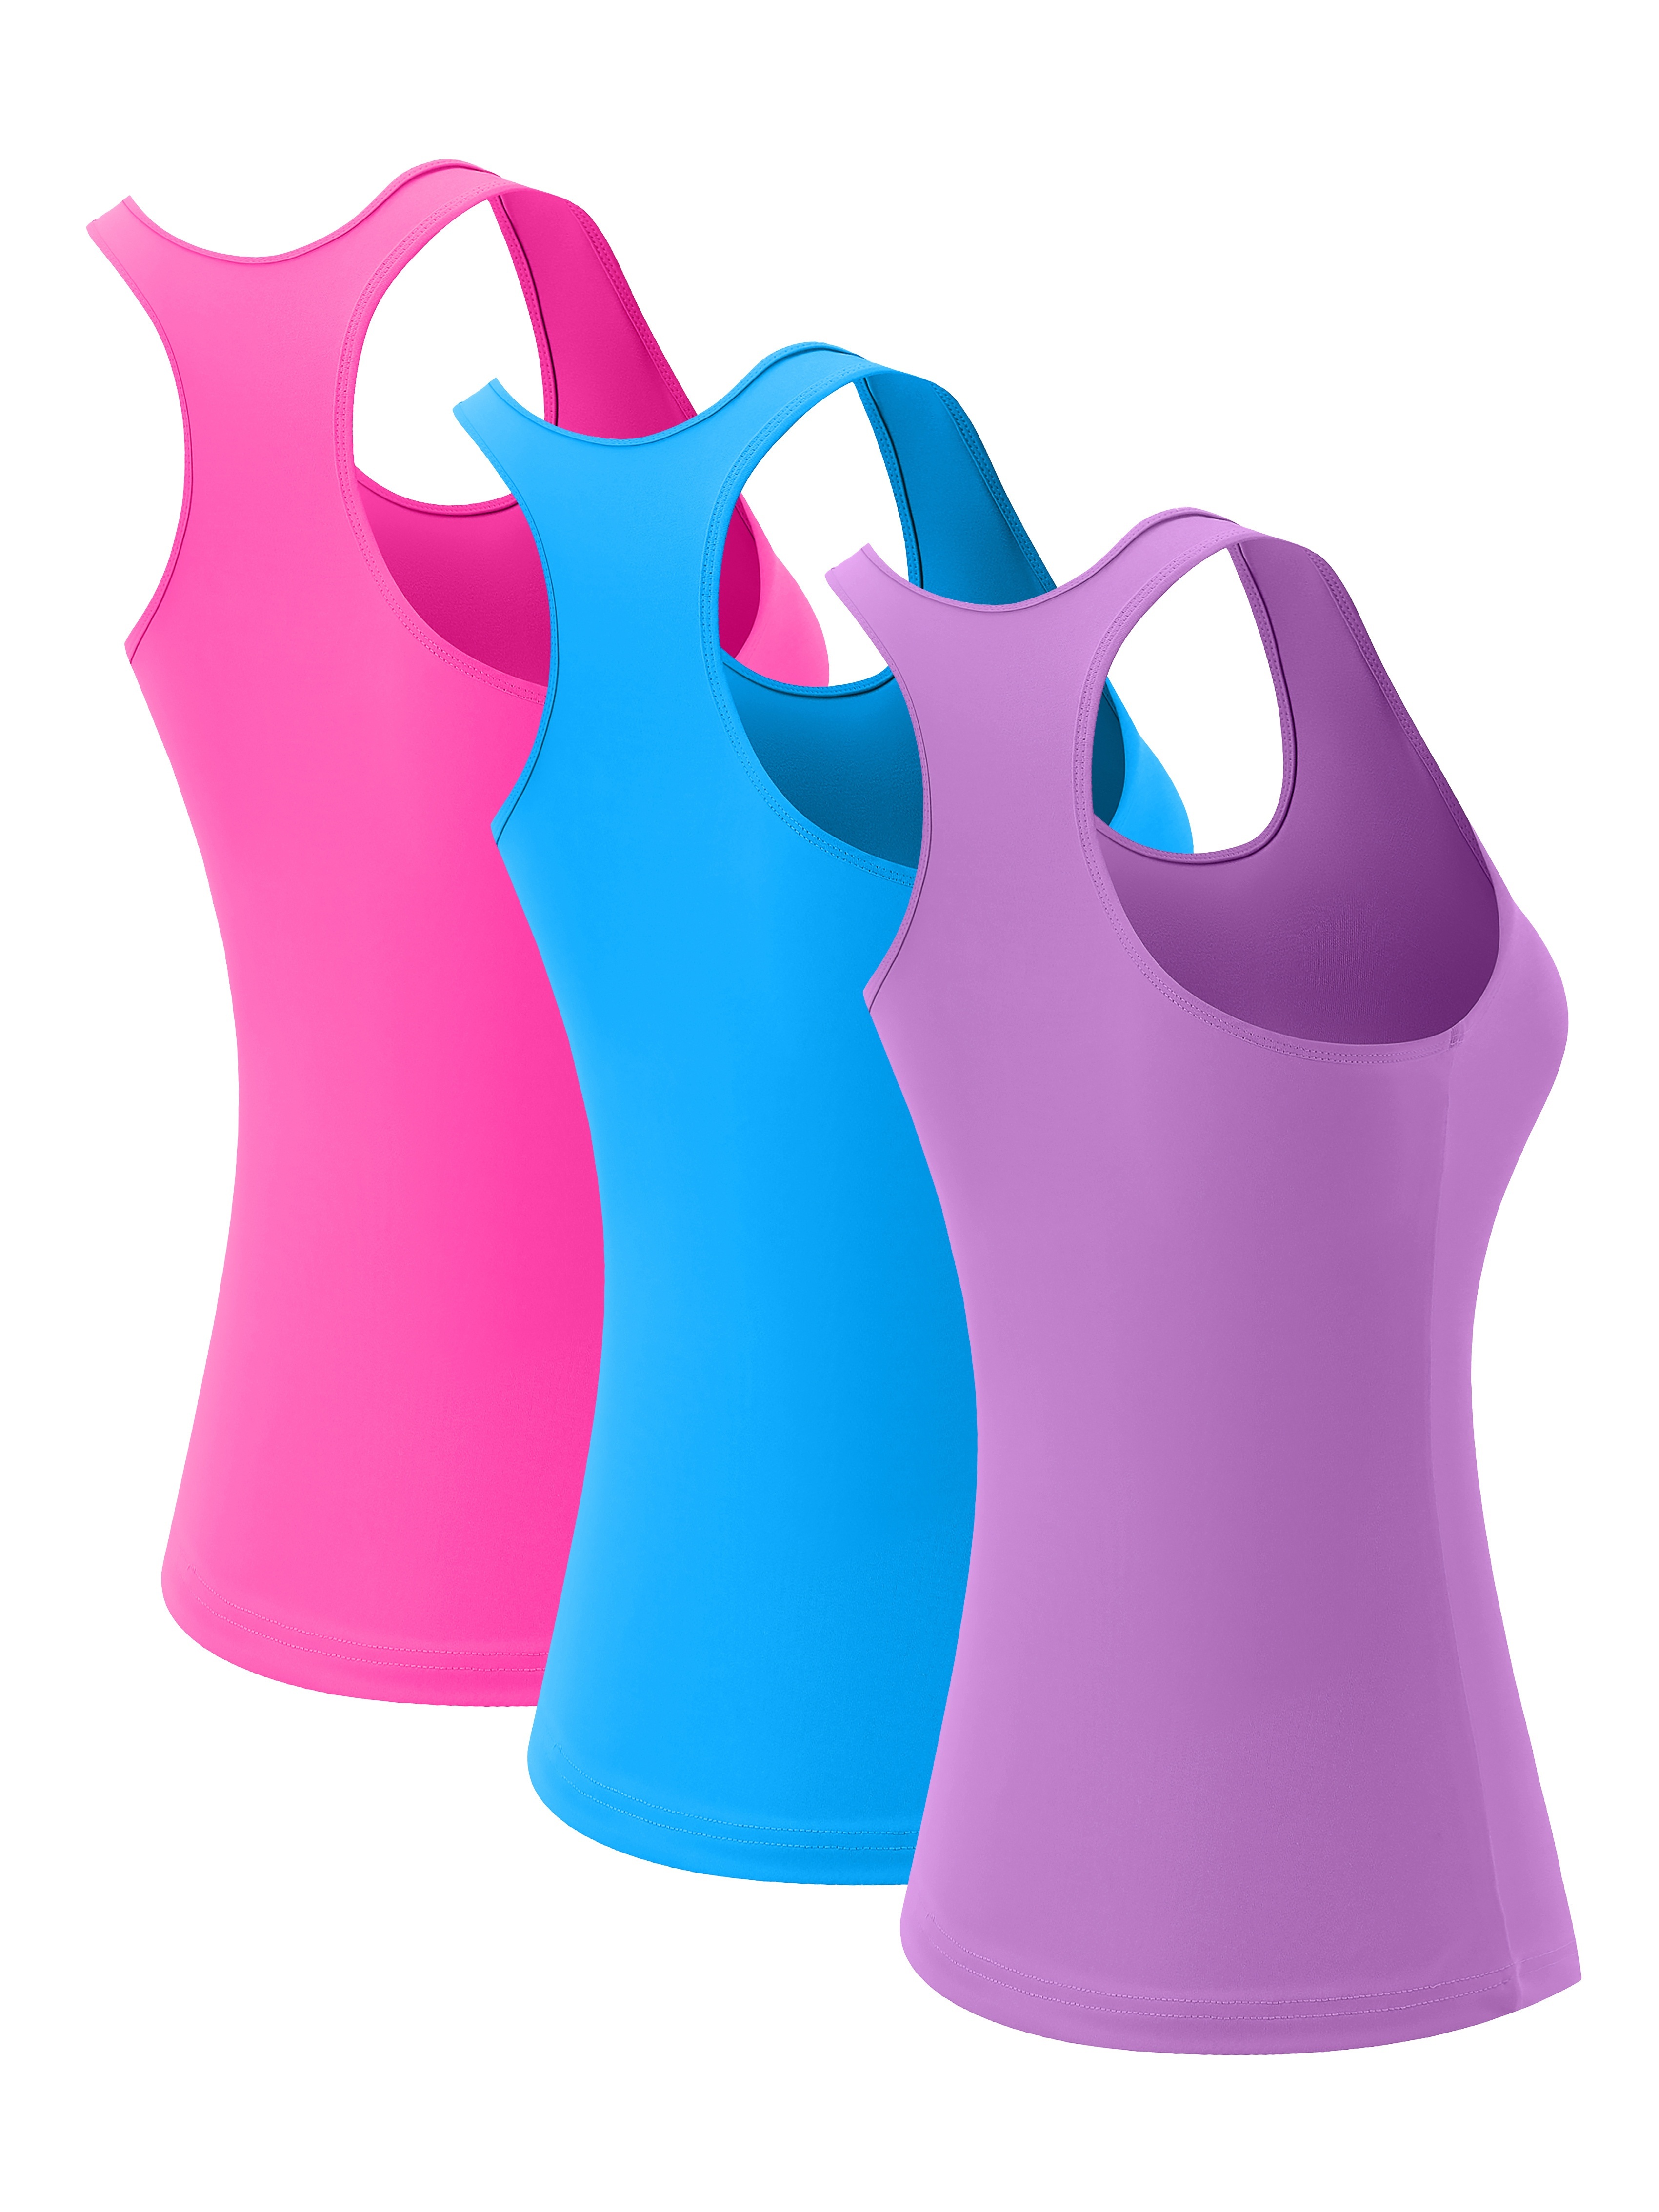  NELEUS Womens 3 Pack Compression Athletic Dry Fit Long Tank  Top